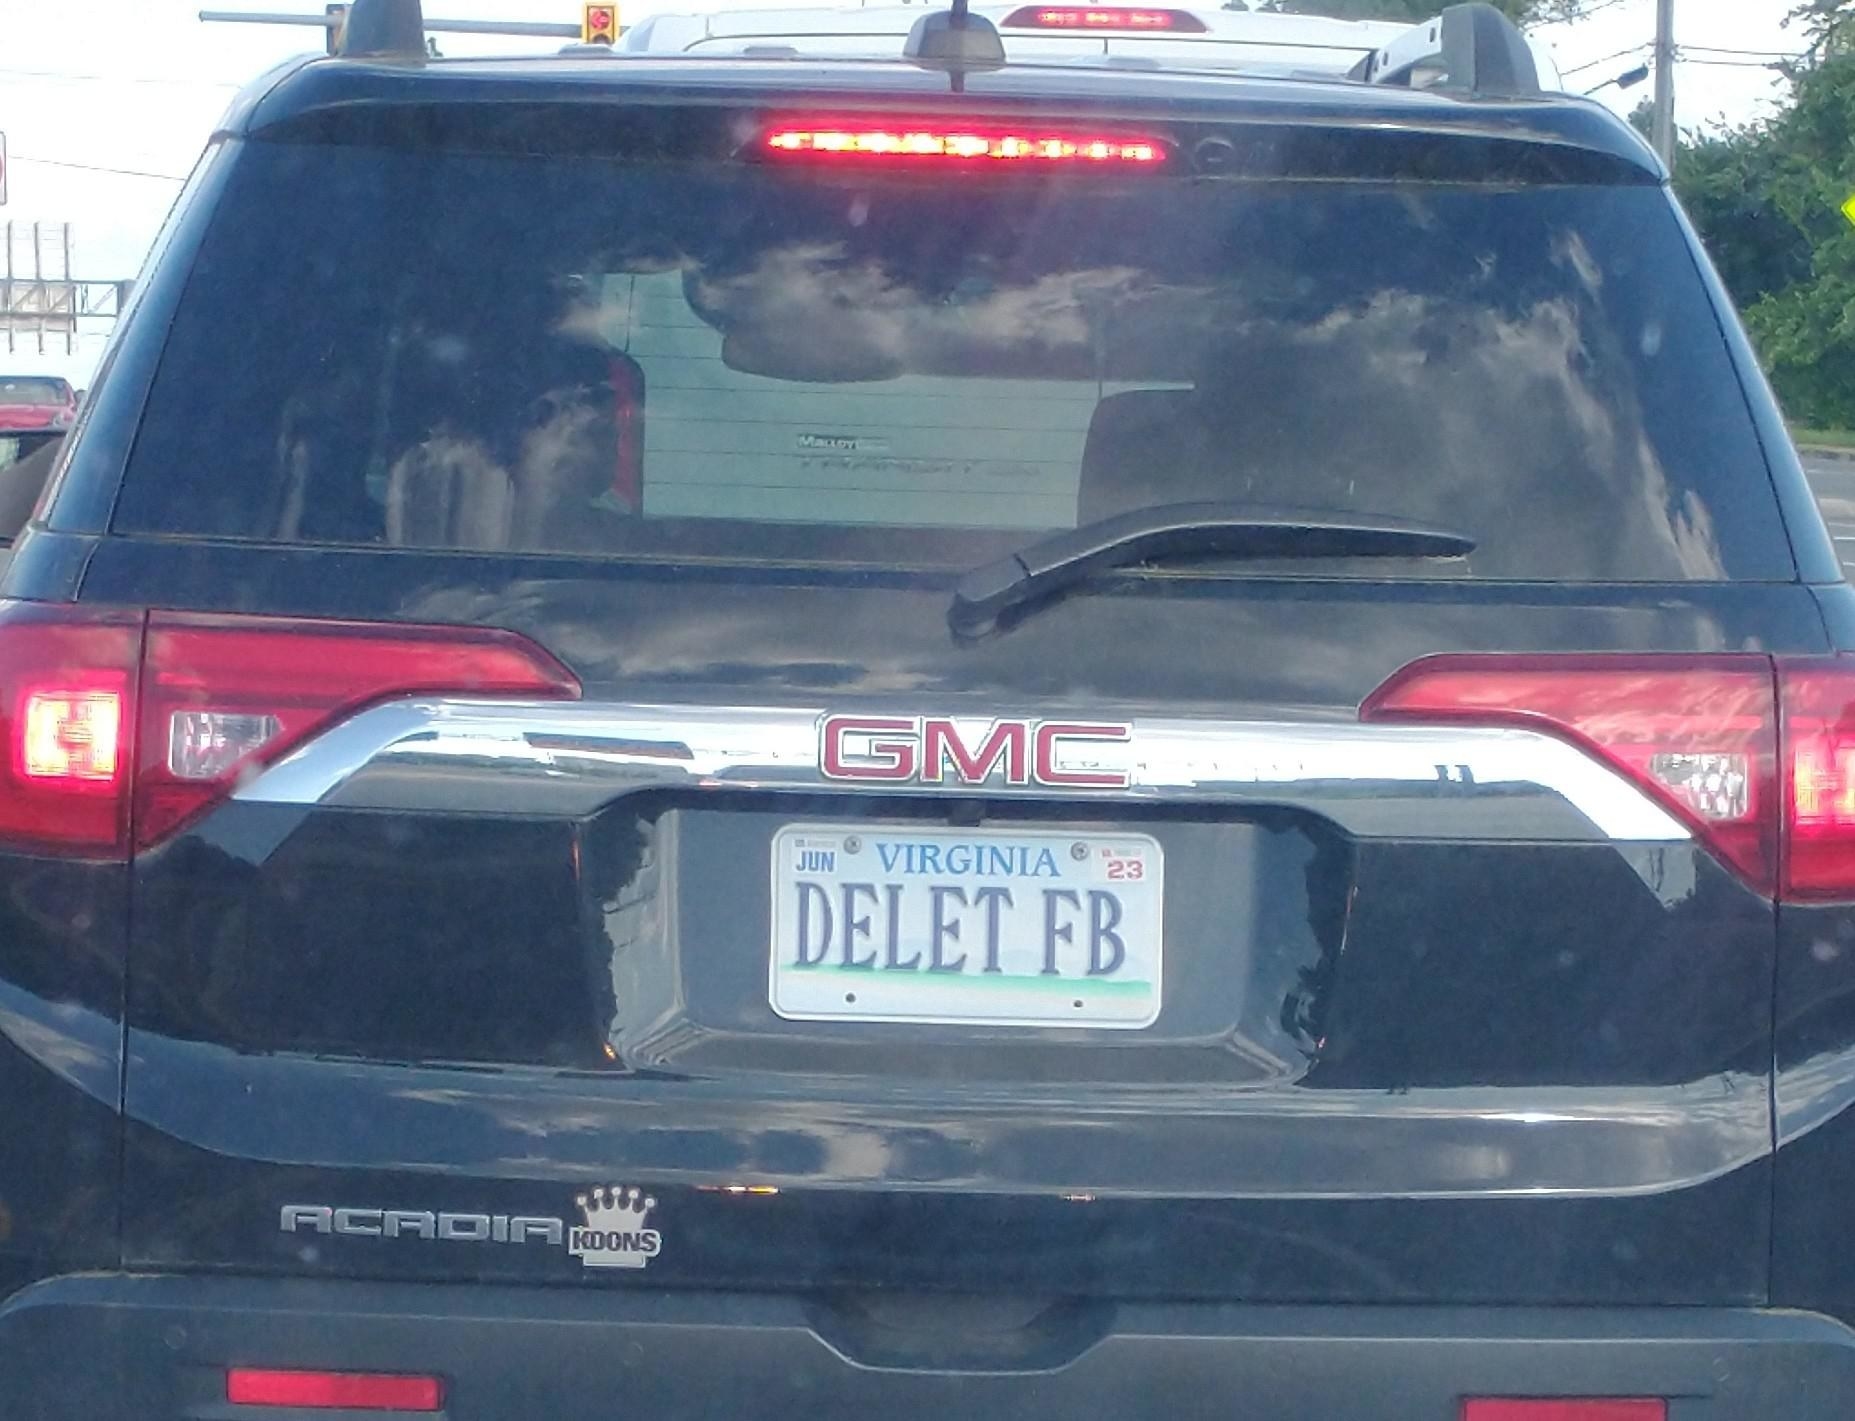 Car with license plate reading &quot;DELET FB&quot;